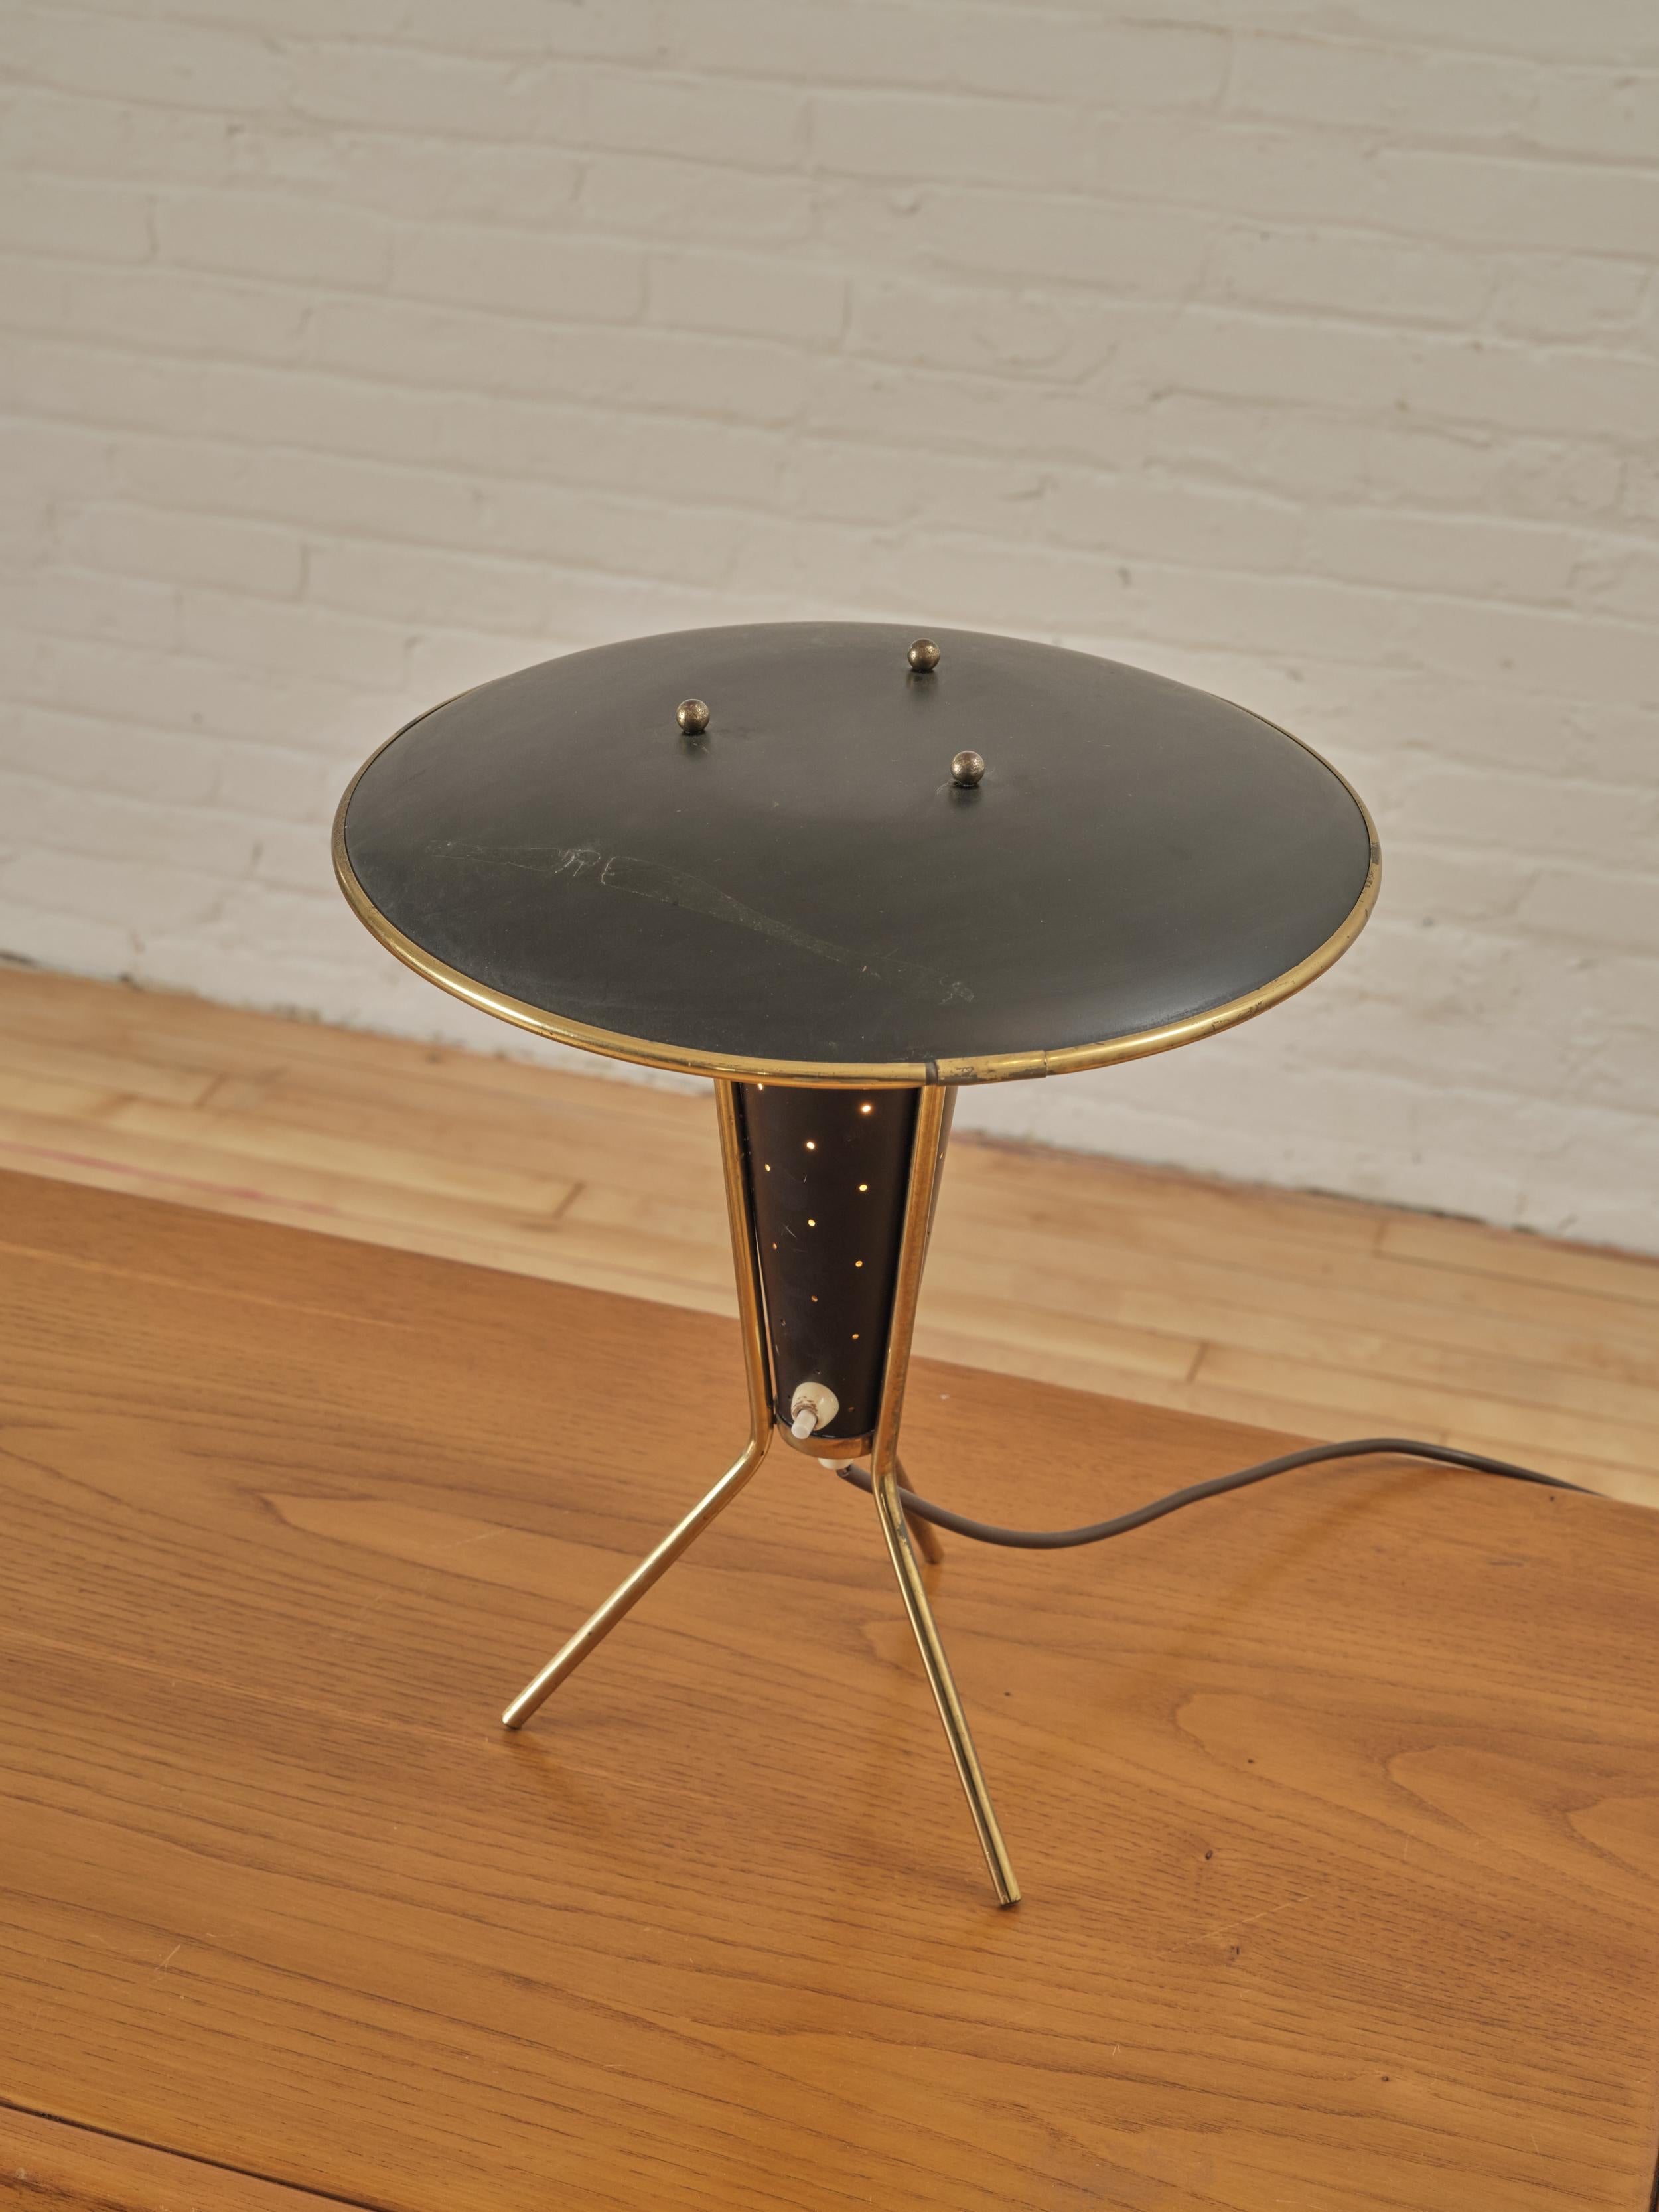 Italian Tripod Table Lamp with a painted saucer shade and brass legs.

